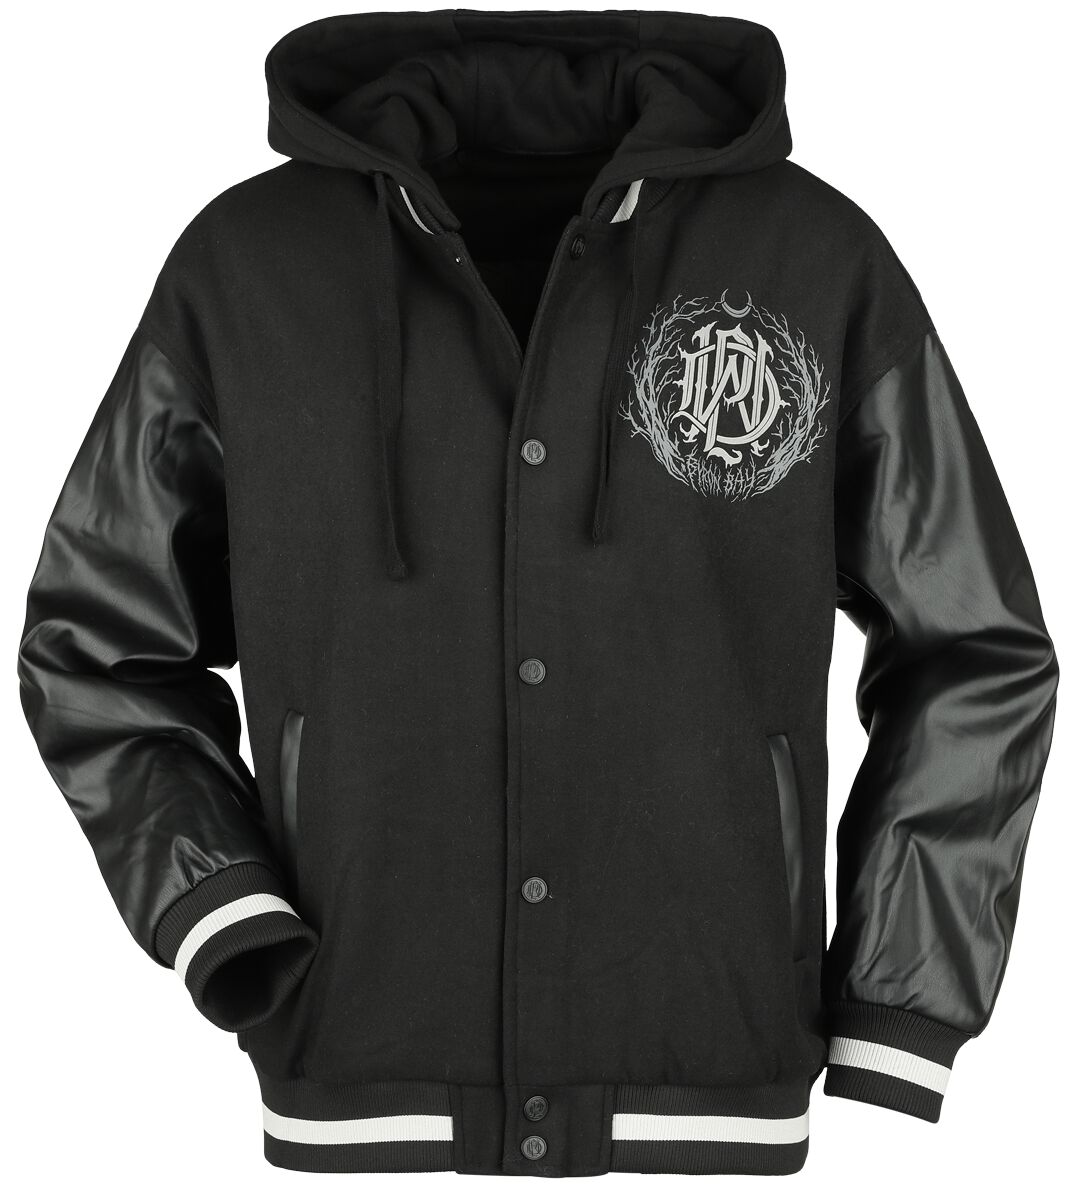 Parkway Drive EMP Signature Collection Collegejacke schwarz grau in L